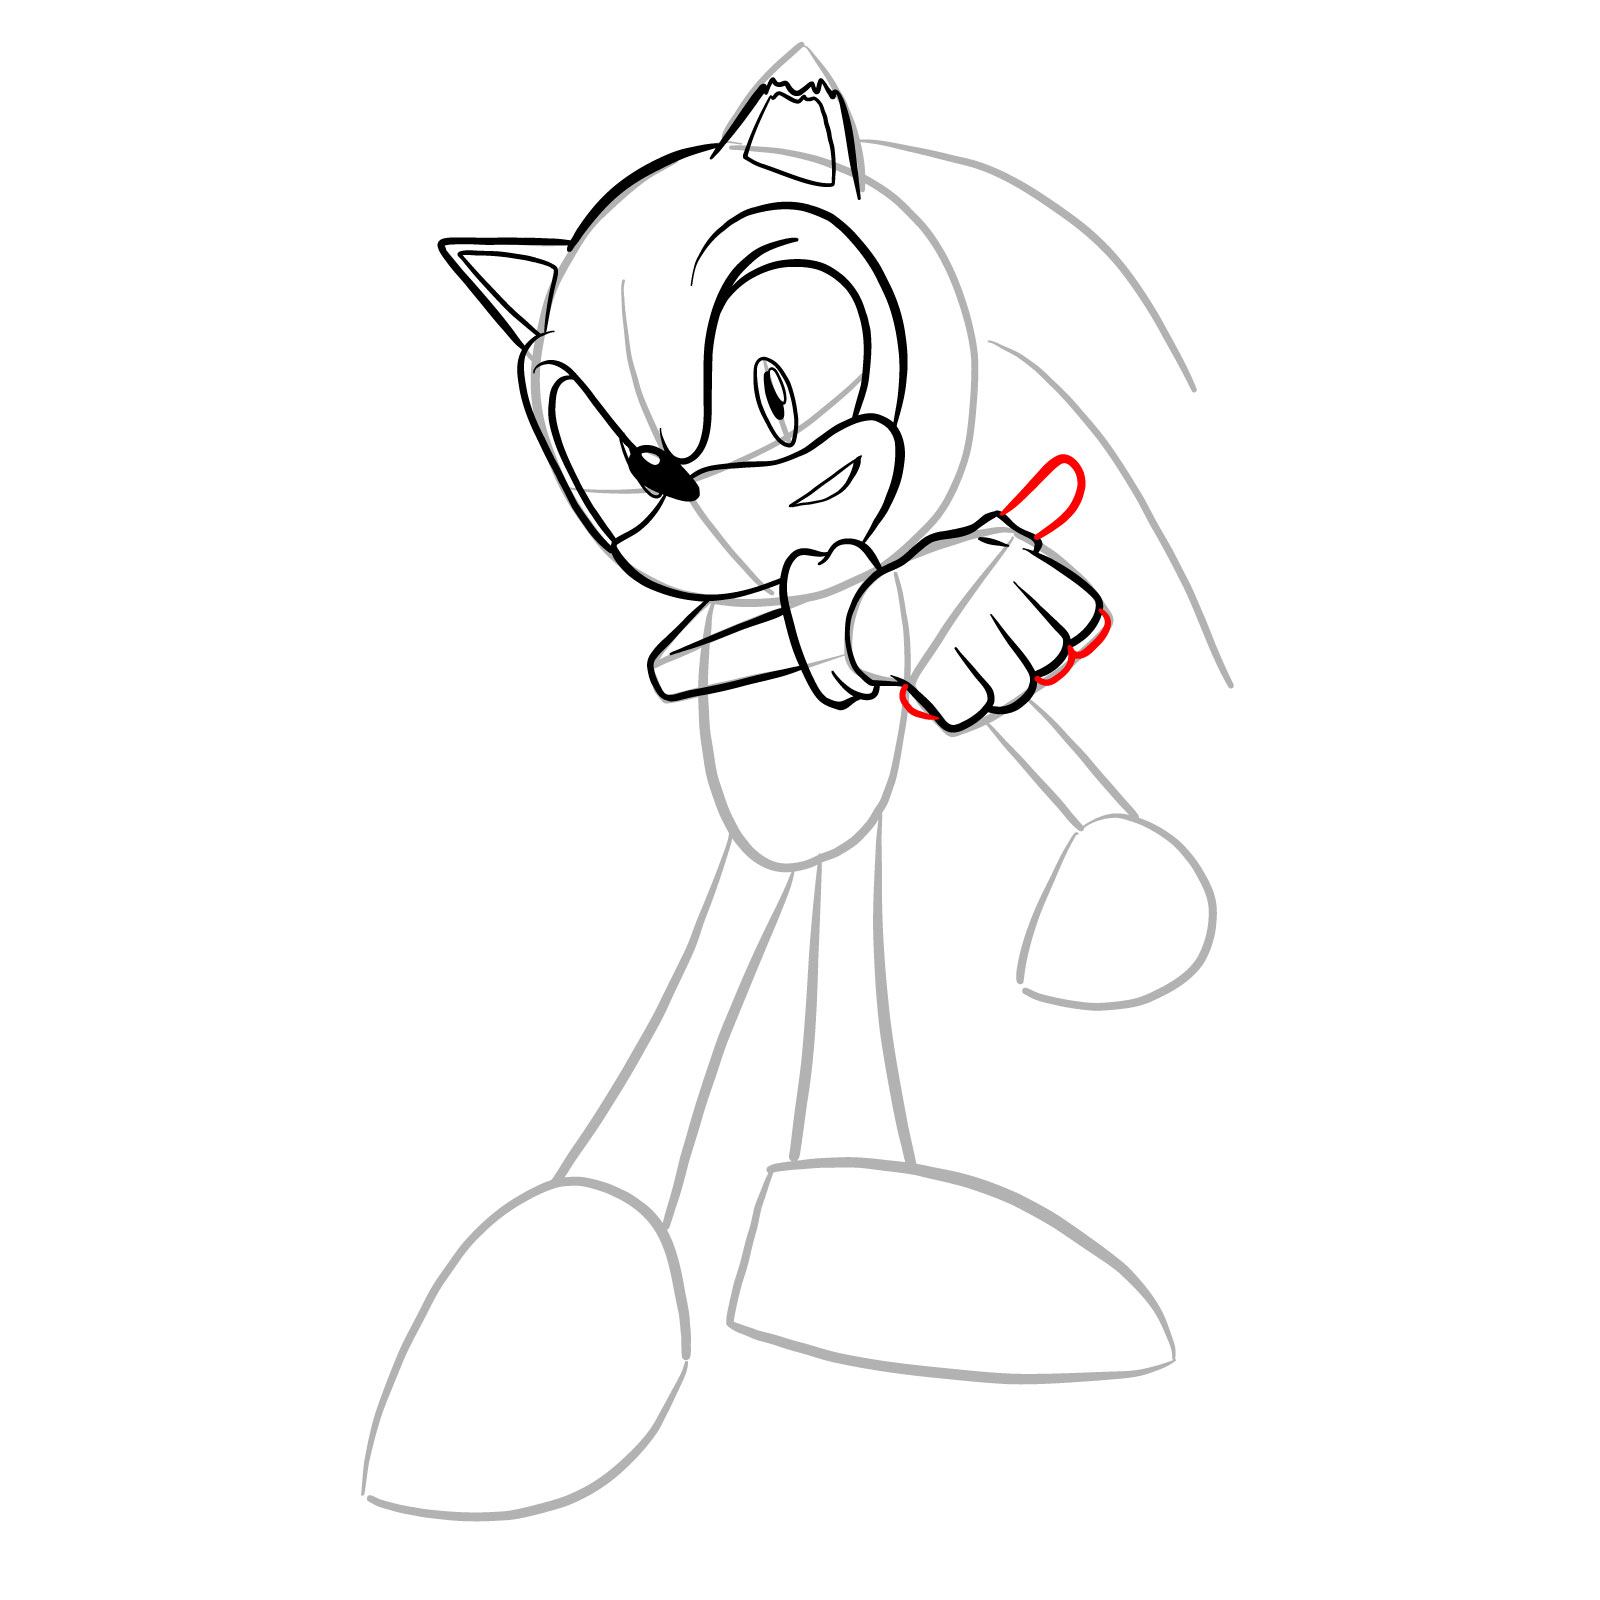 How to draw Coldsteel the Hedgehog - step 17